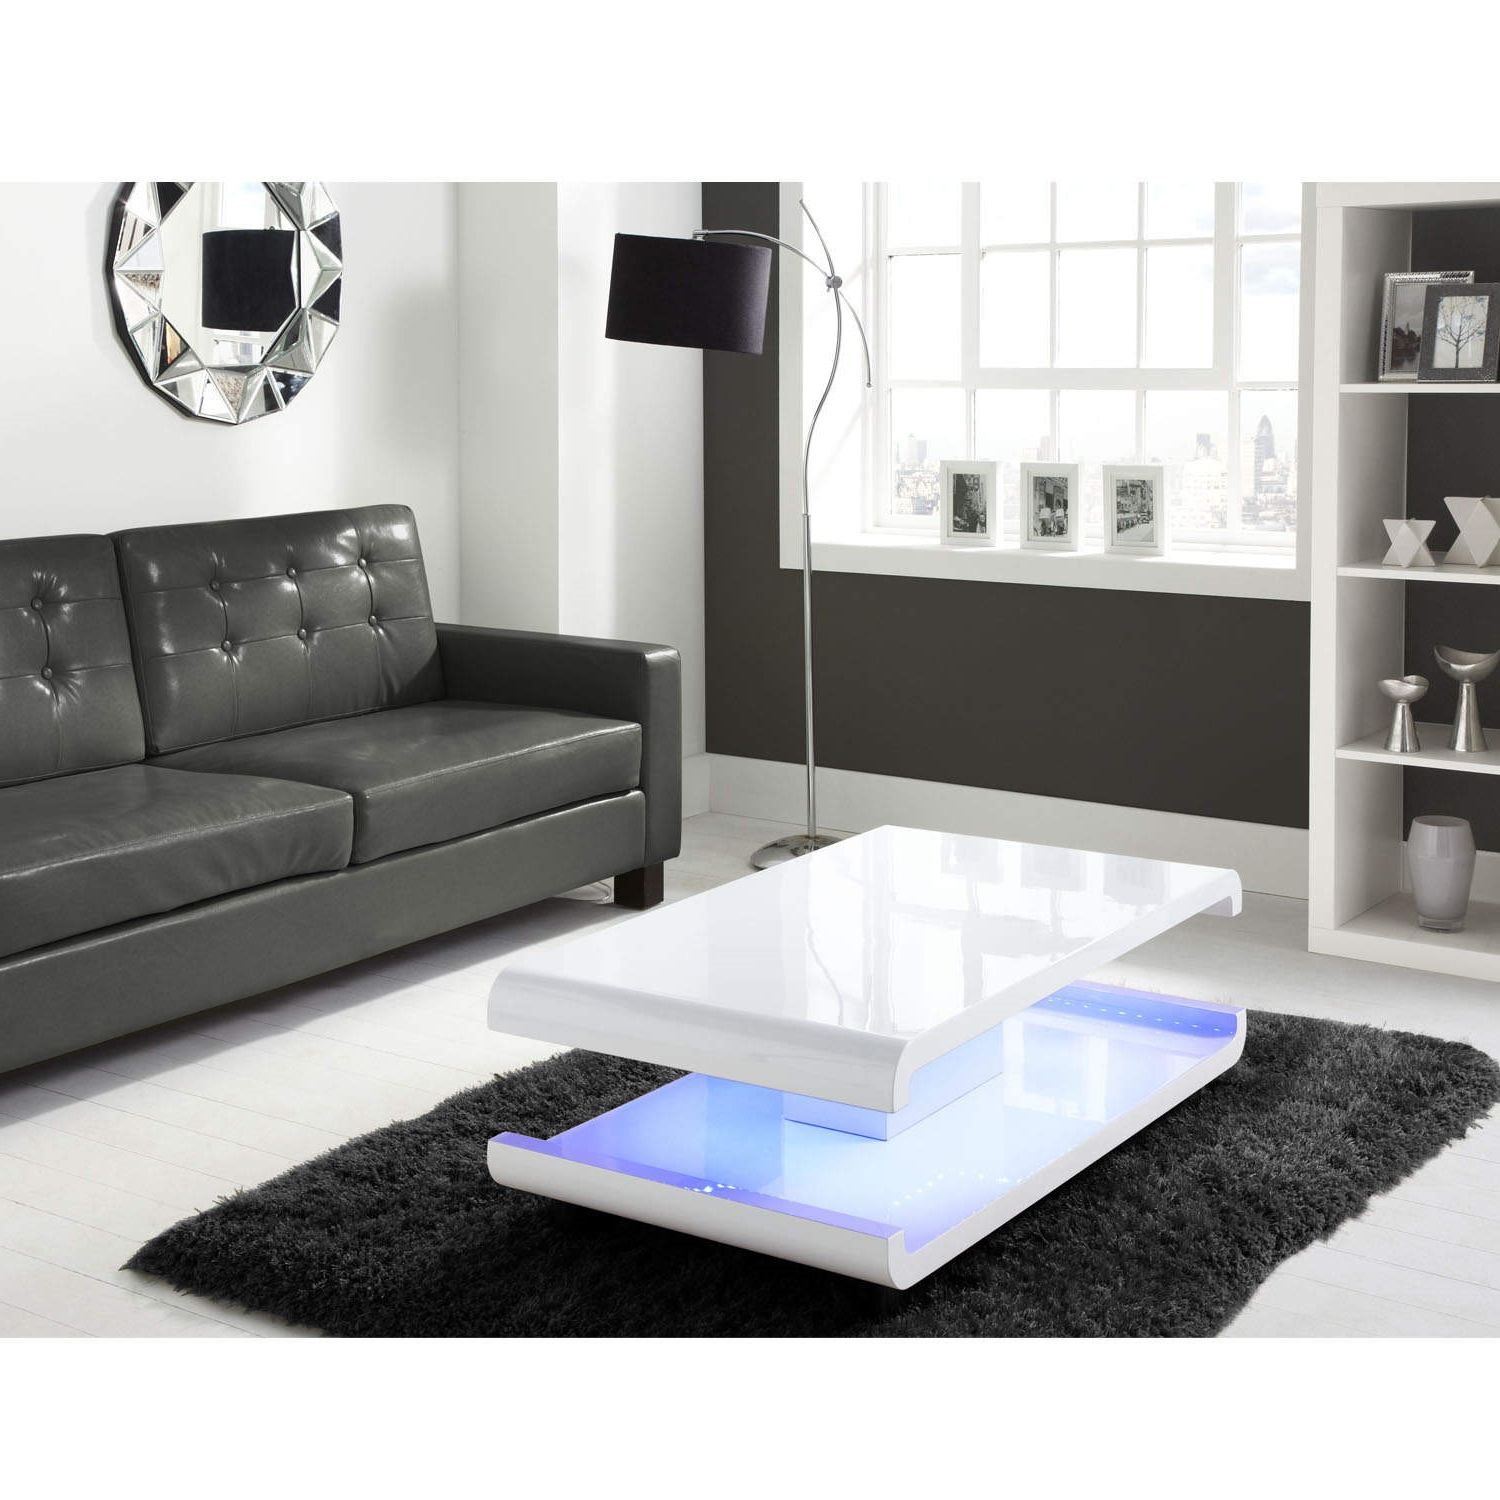 Tiffany White High Gloss Coffee Table With Led Lighting | Furniture123 Throughout Coffee Tables With Led Lights (Gallery 18 of 20)